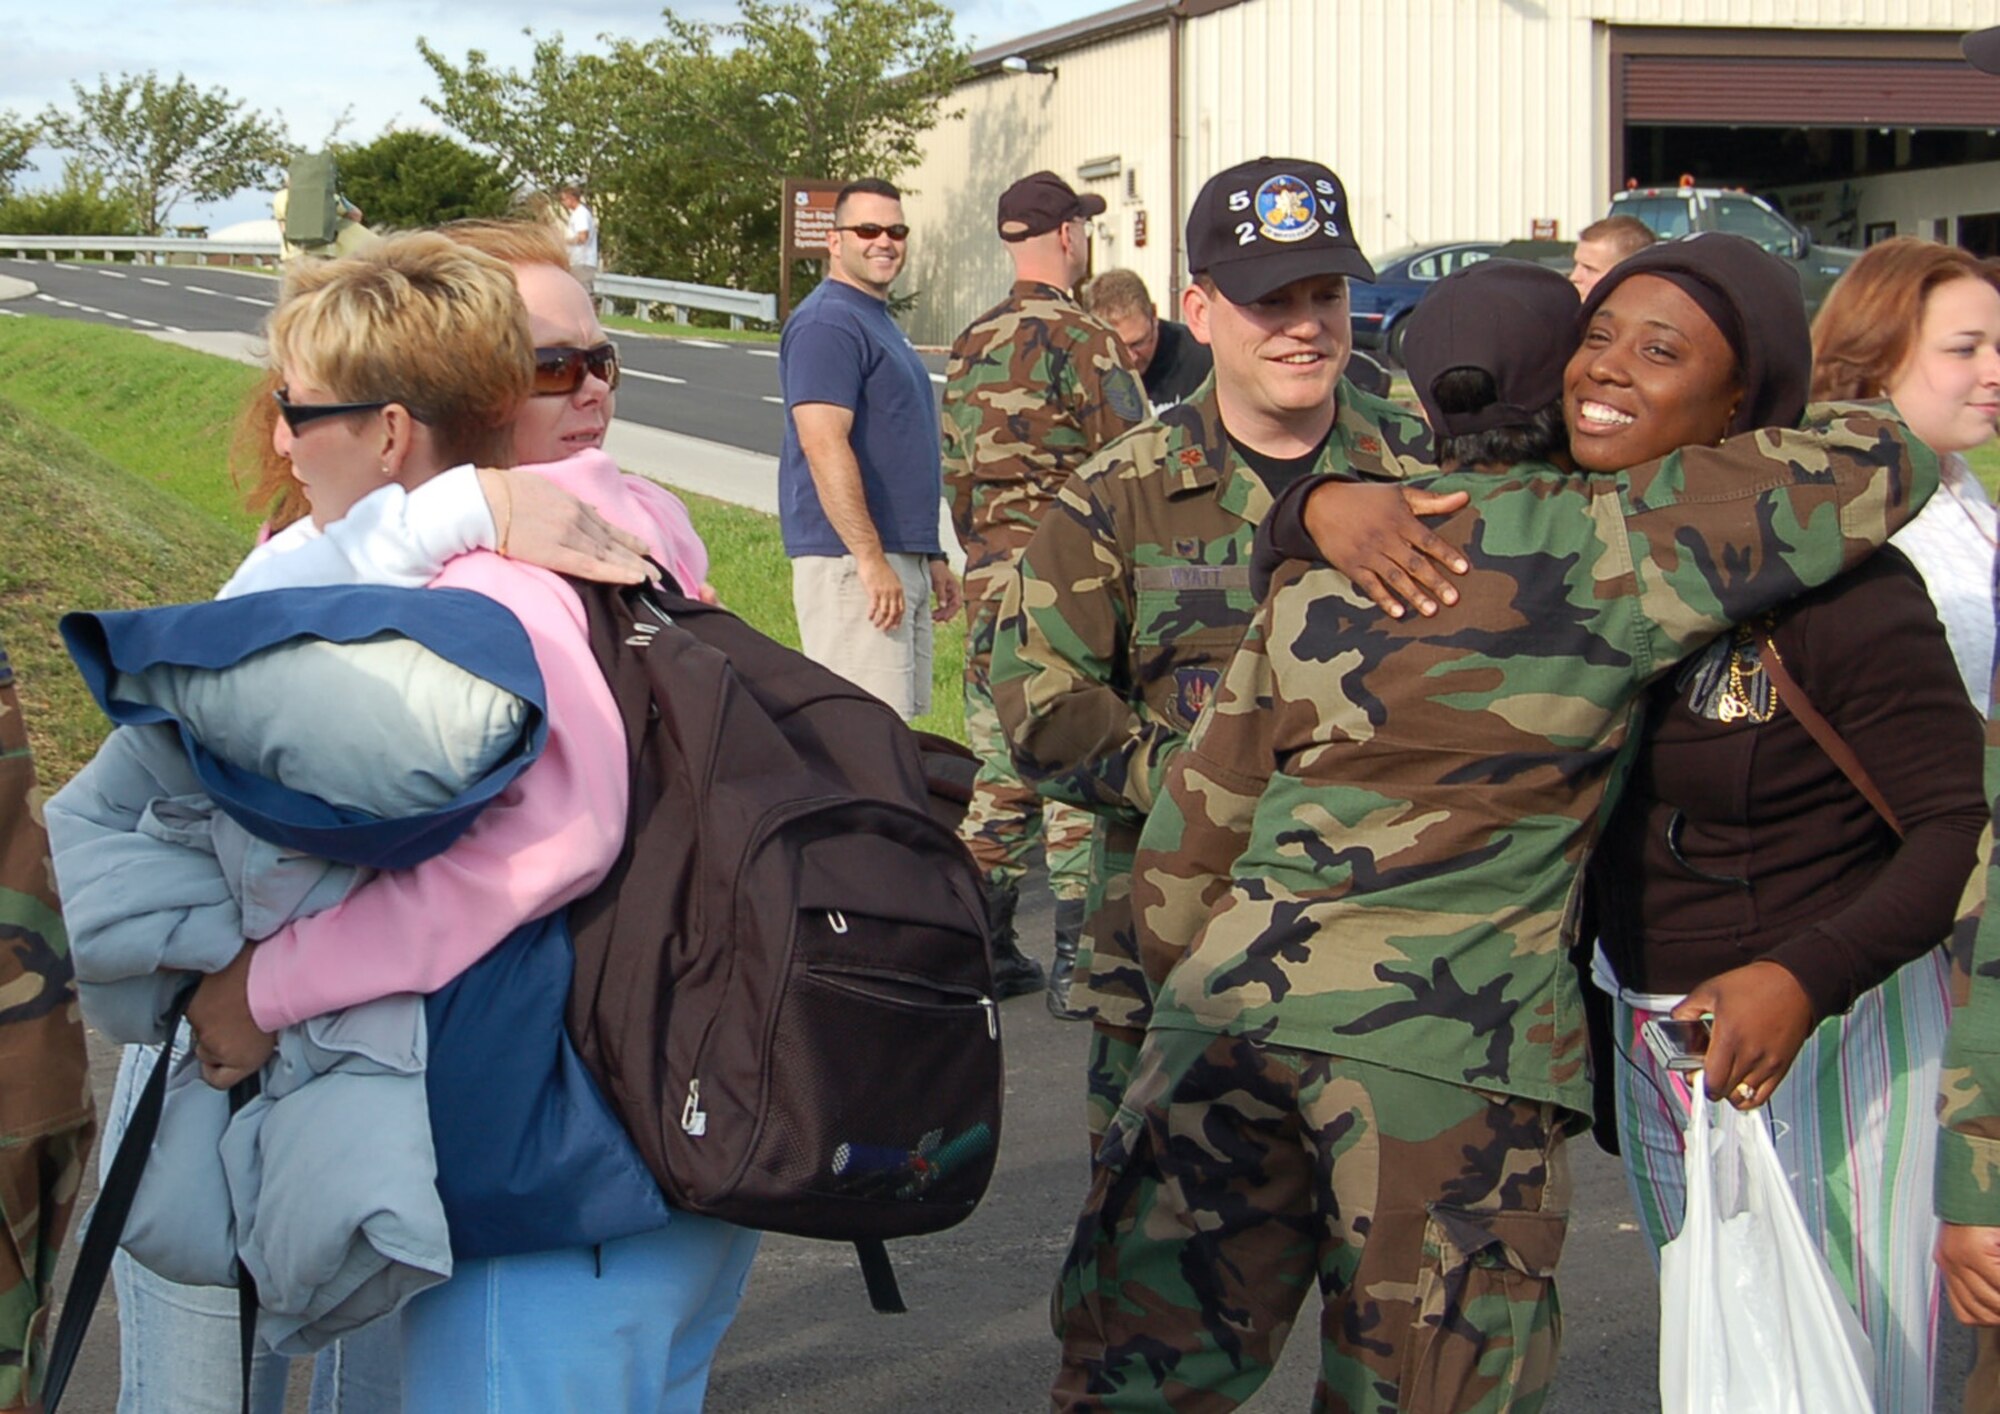 SPANGDAHLEM AIR BASE, Germany – Airmen from across the base greet returning members of the 81st Aircraft Maintenance Unit after their return from a deployment to Royal Air Force Lakenheath, England July 31. Members of the 81st Fighter Squadron and AMU traveled to Lakenheath when the Spangdahlem Air Base runway closed in June for repairs. (U.S. Air Force photo/Staff Sgt. Tammie Moore)